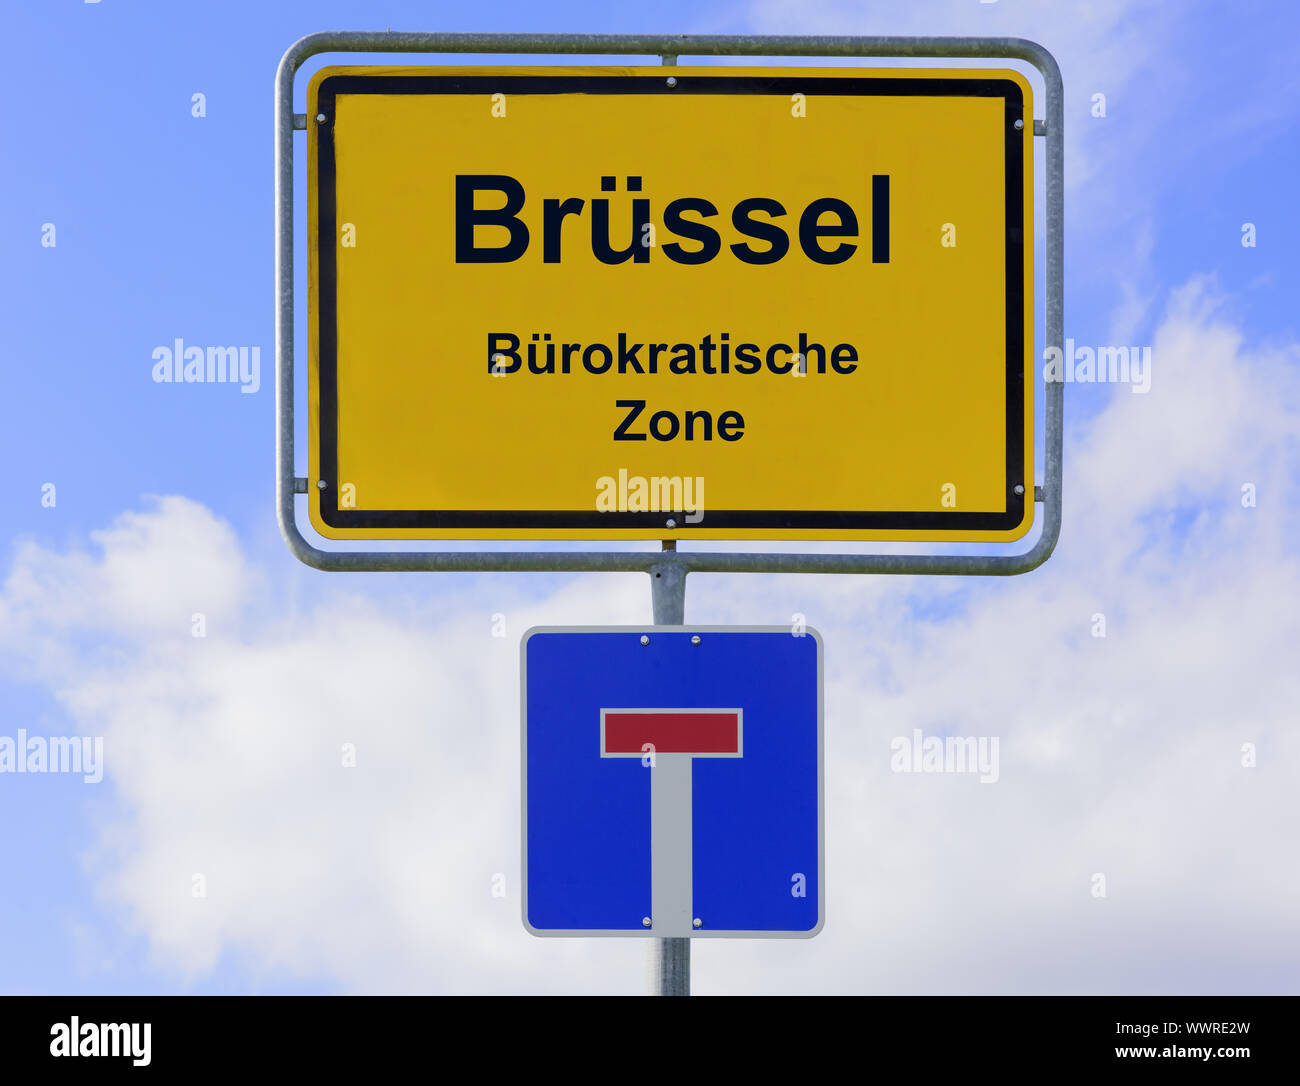 European policy in Brussels as a reality-free zone Stock Photo